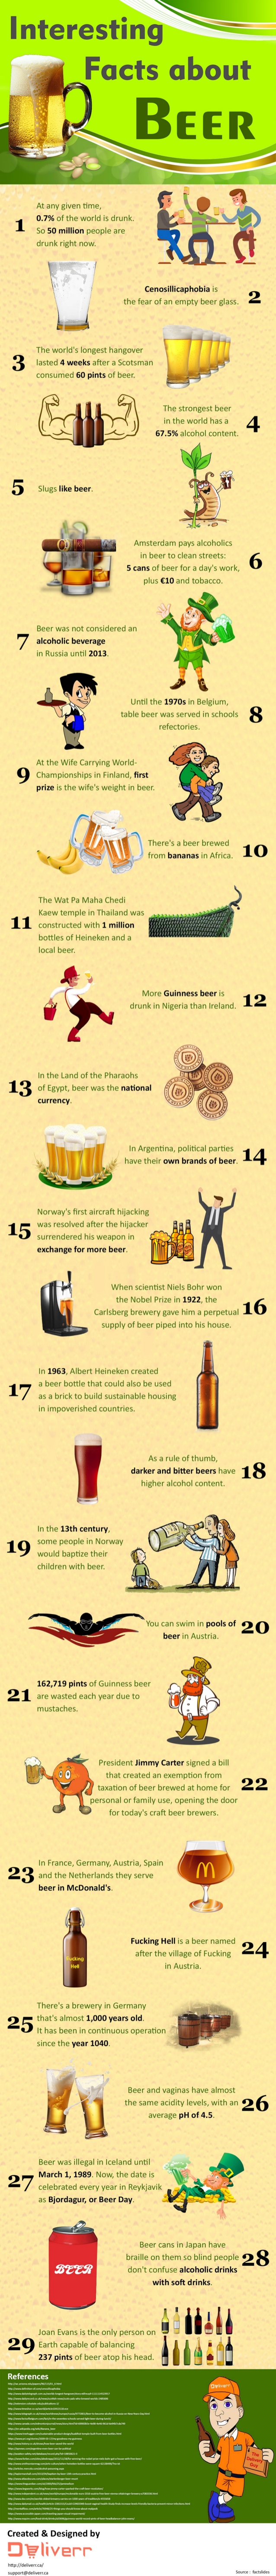 Interesting Facts About Beer